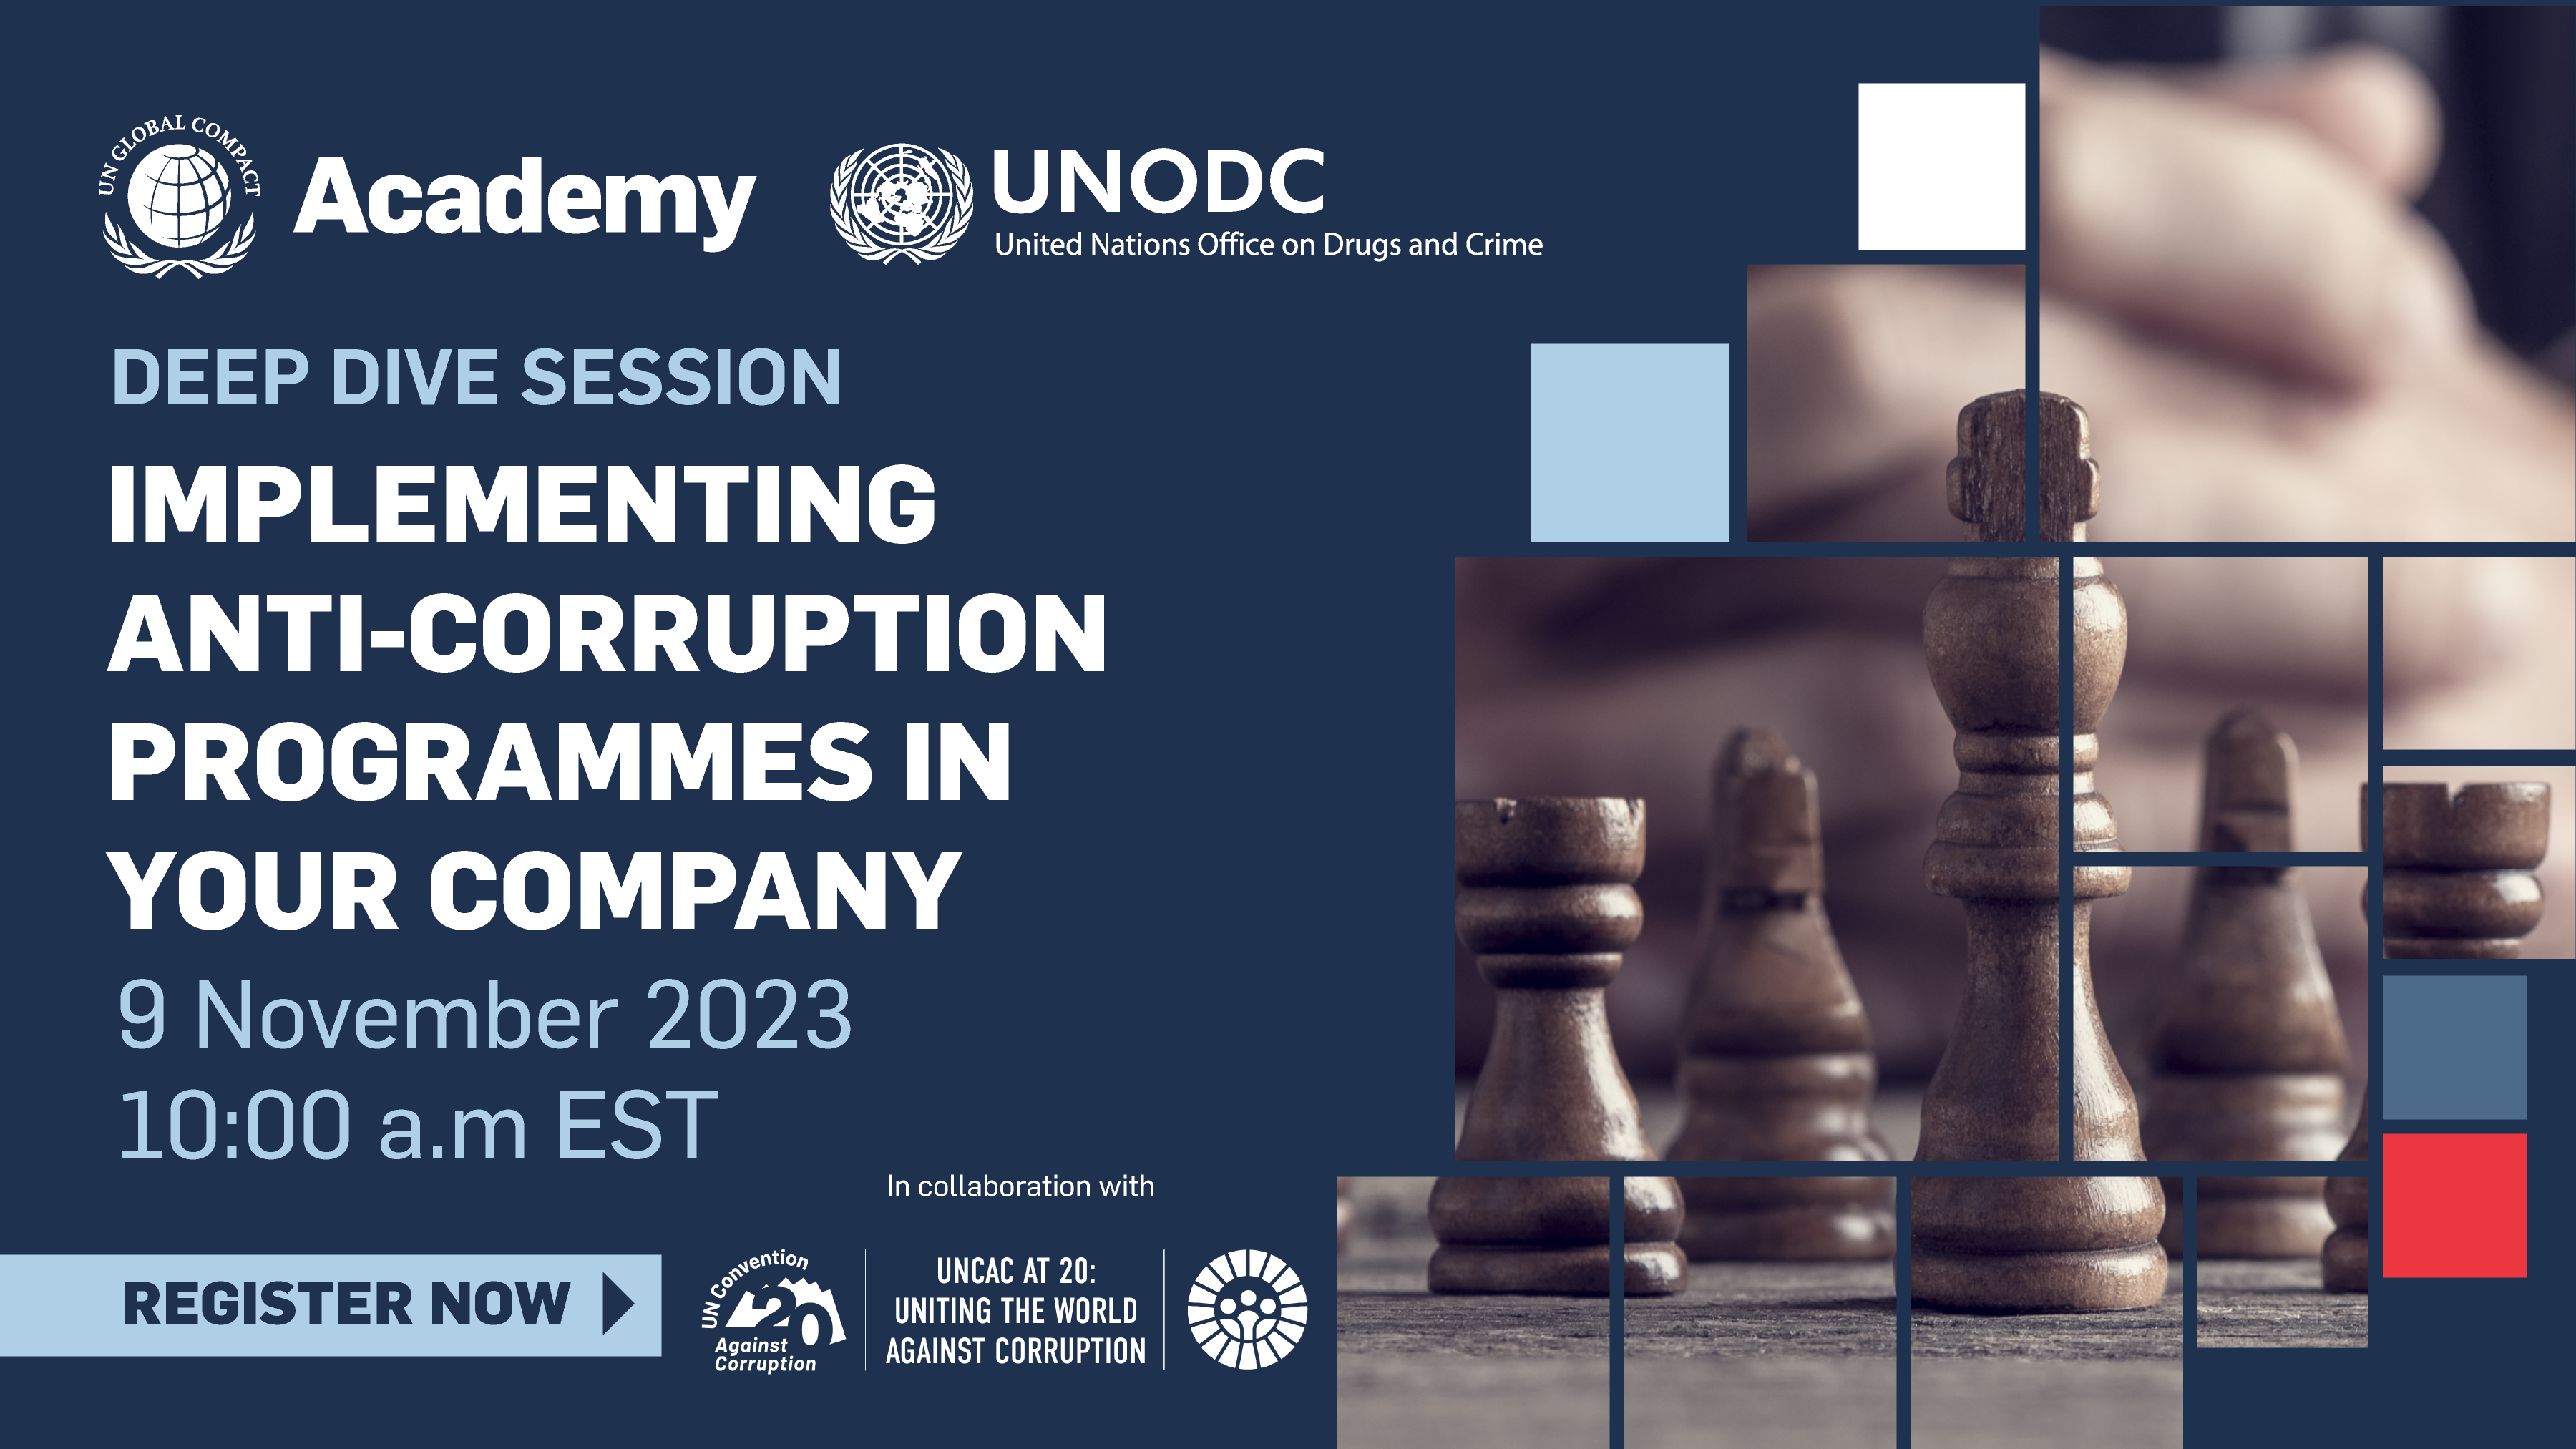 This deep dive session for member companies is focused on Implementing anti-corruption programs within your company and is hosted by UN Global Compact Academy and UNODC.